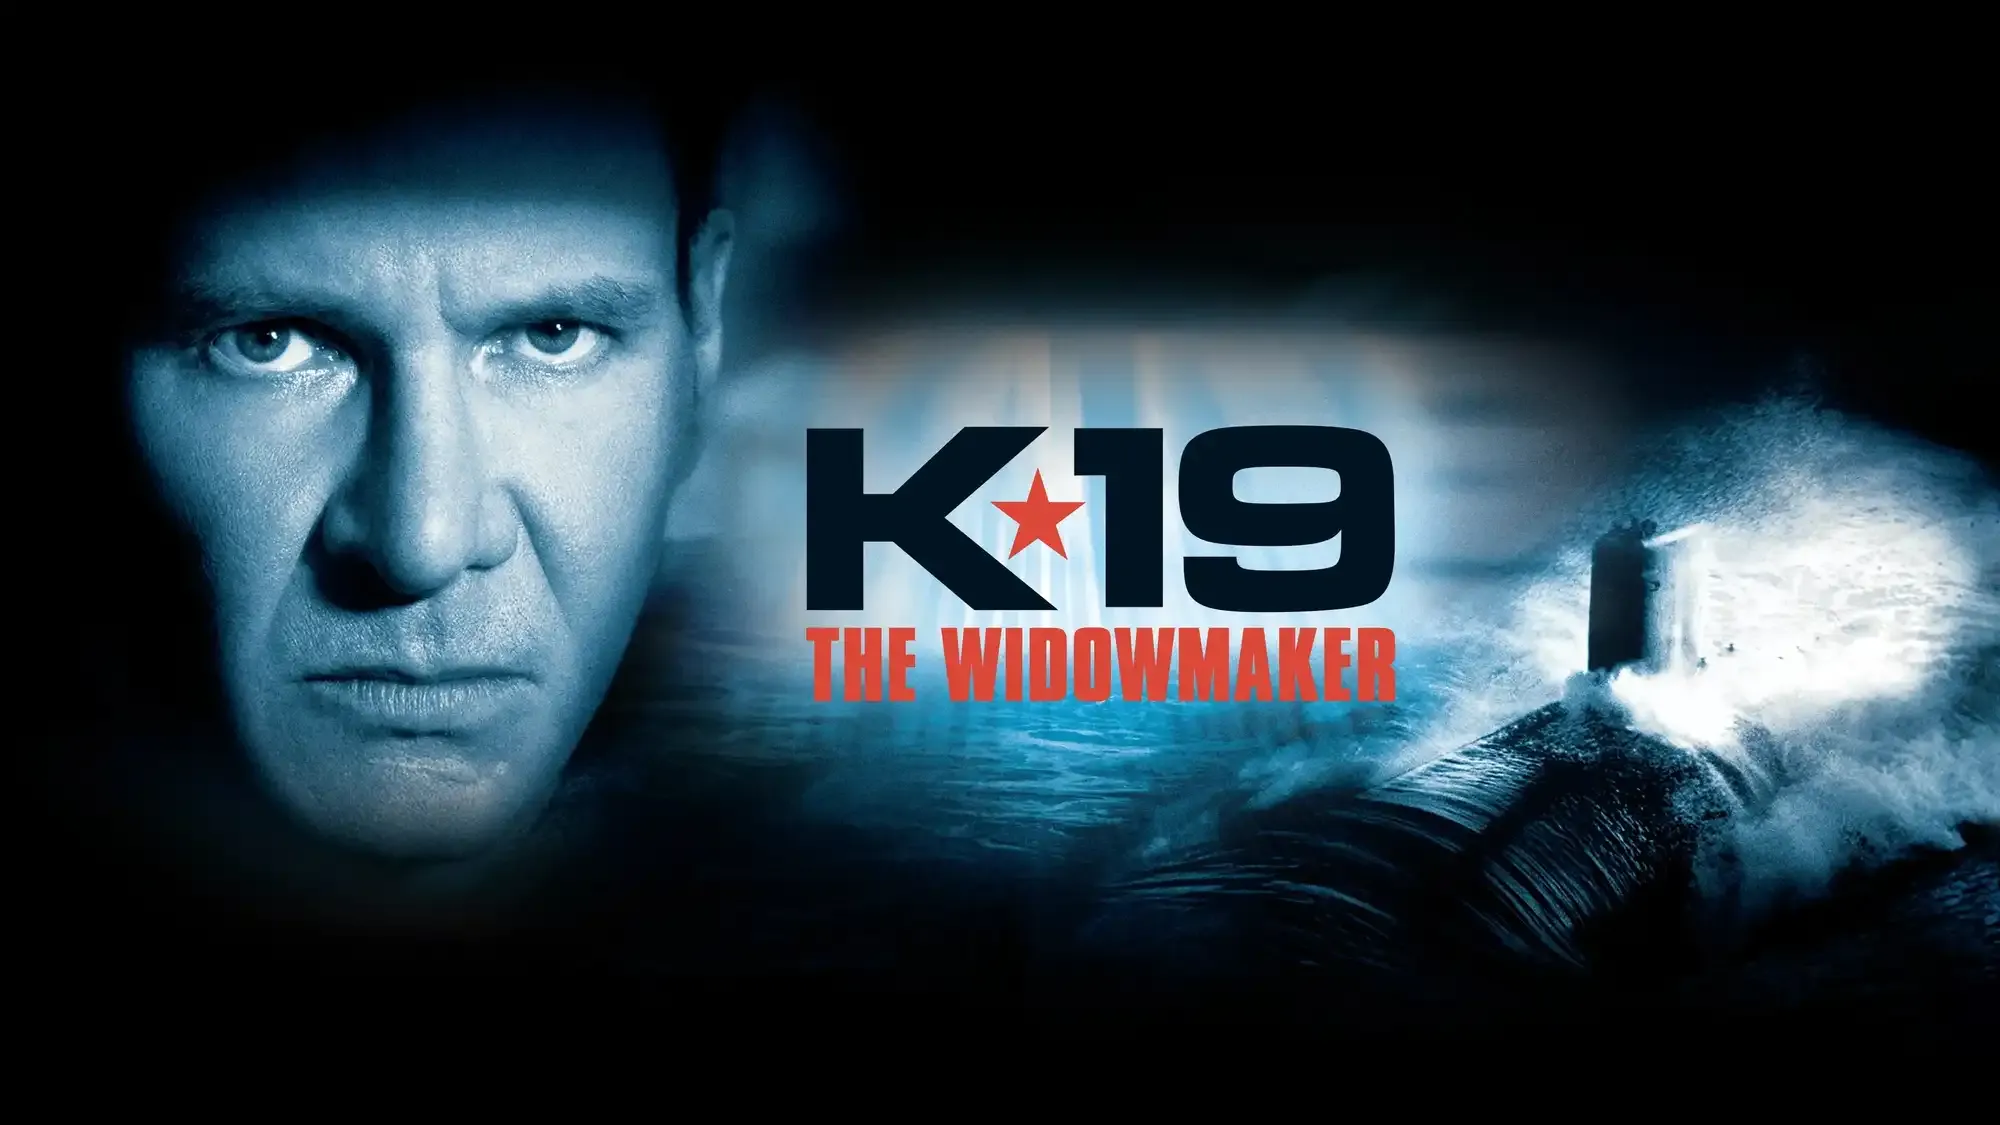 K-19: The Widowmaker movie review